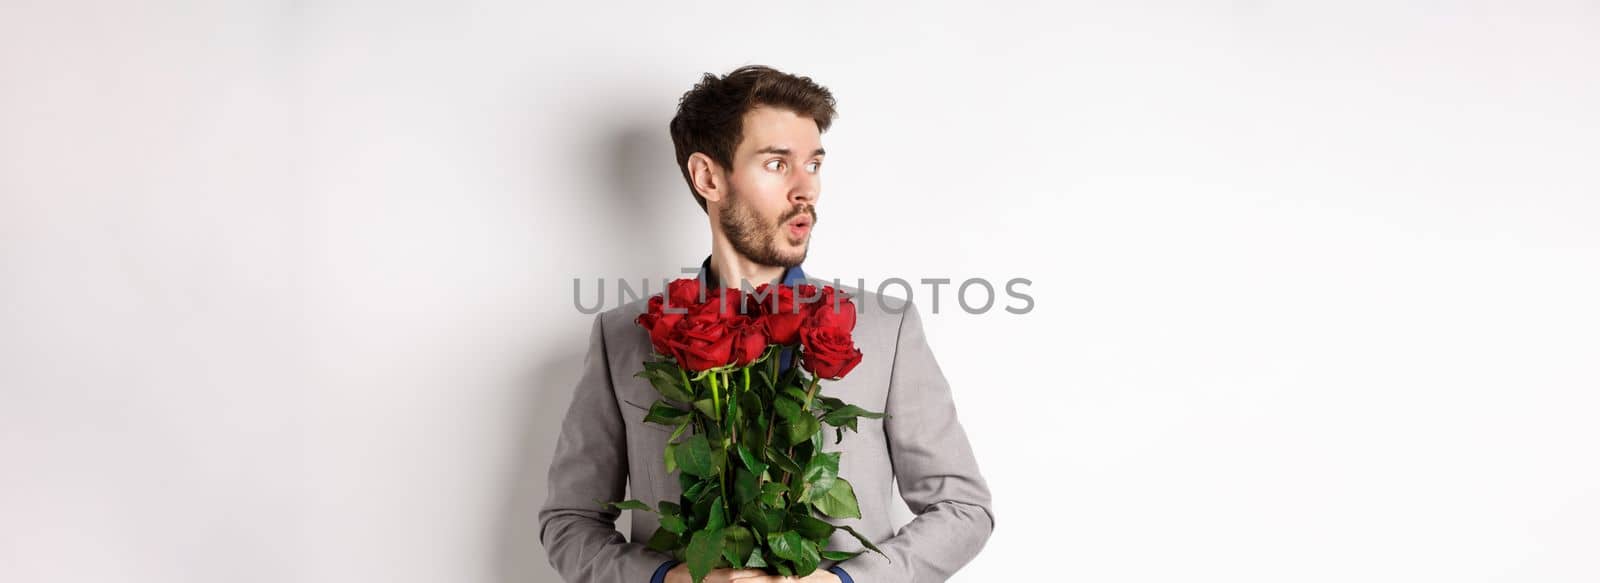 Nervous boyfriend waiting for his date on valentines day, looking left amazed, holding bouquet of red roses, standing in suit over white background.